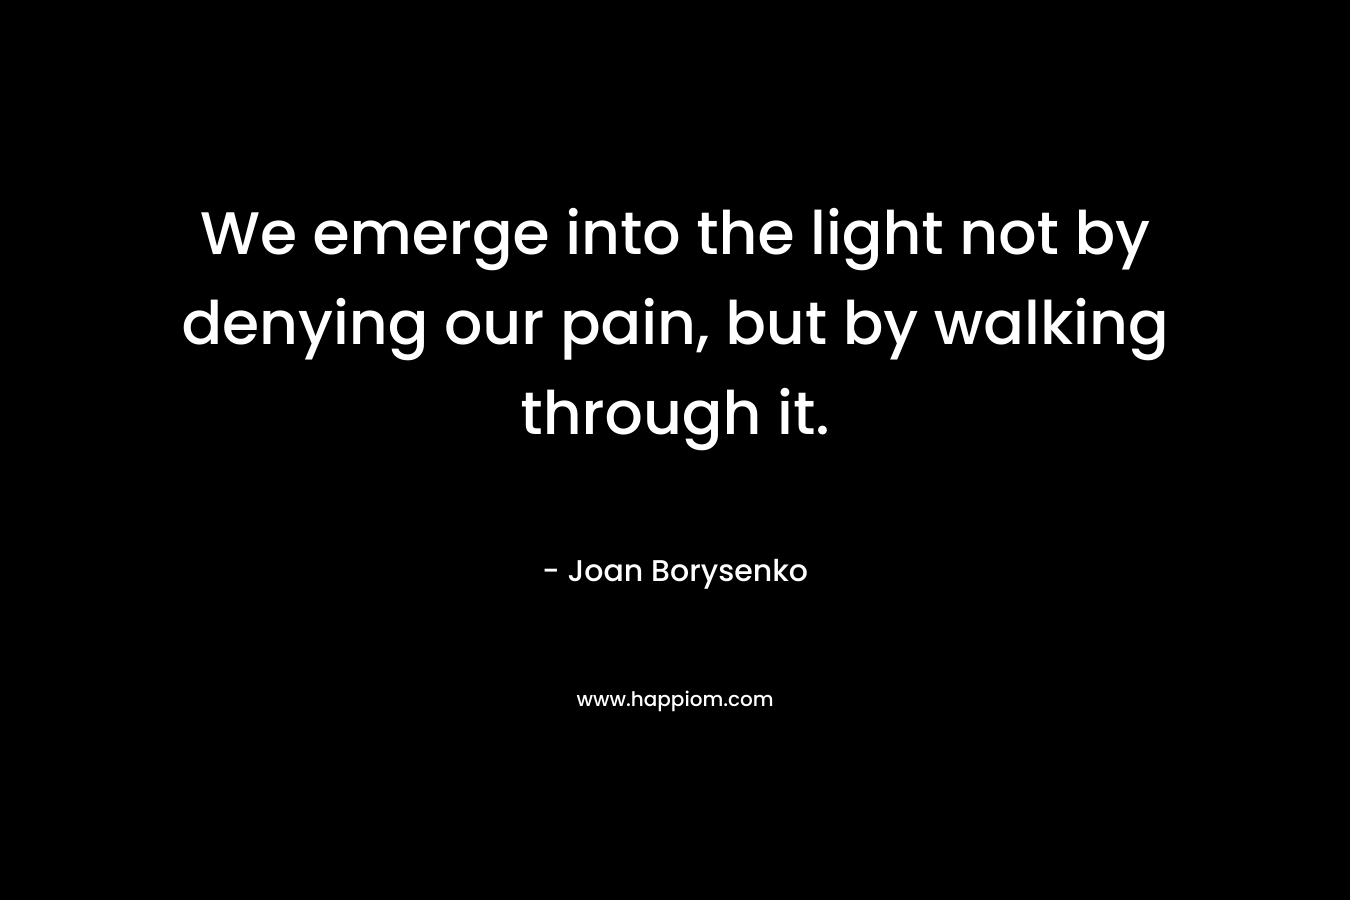 We emerge into the light not by denying our pain, but by walking through it. – Joan Borysenko